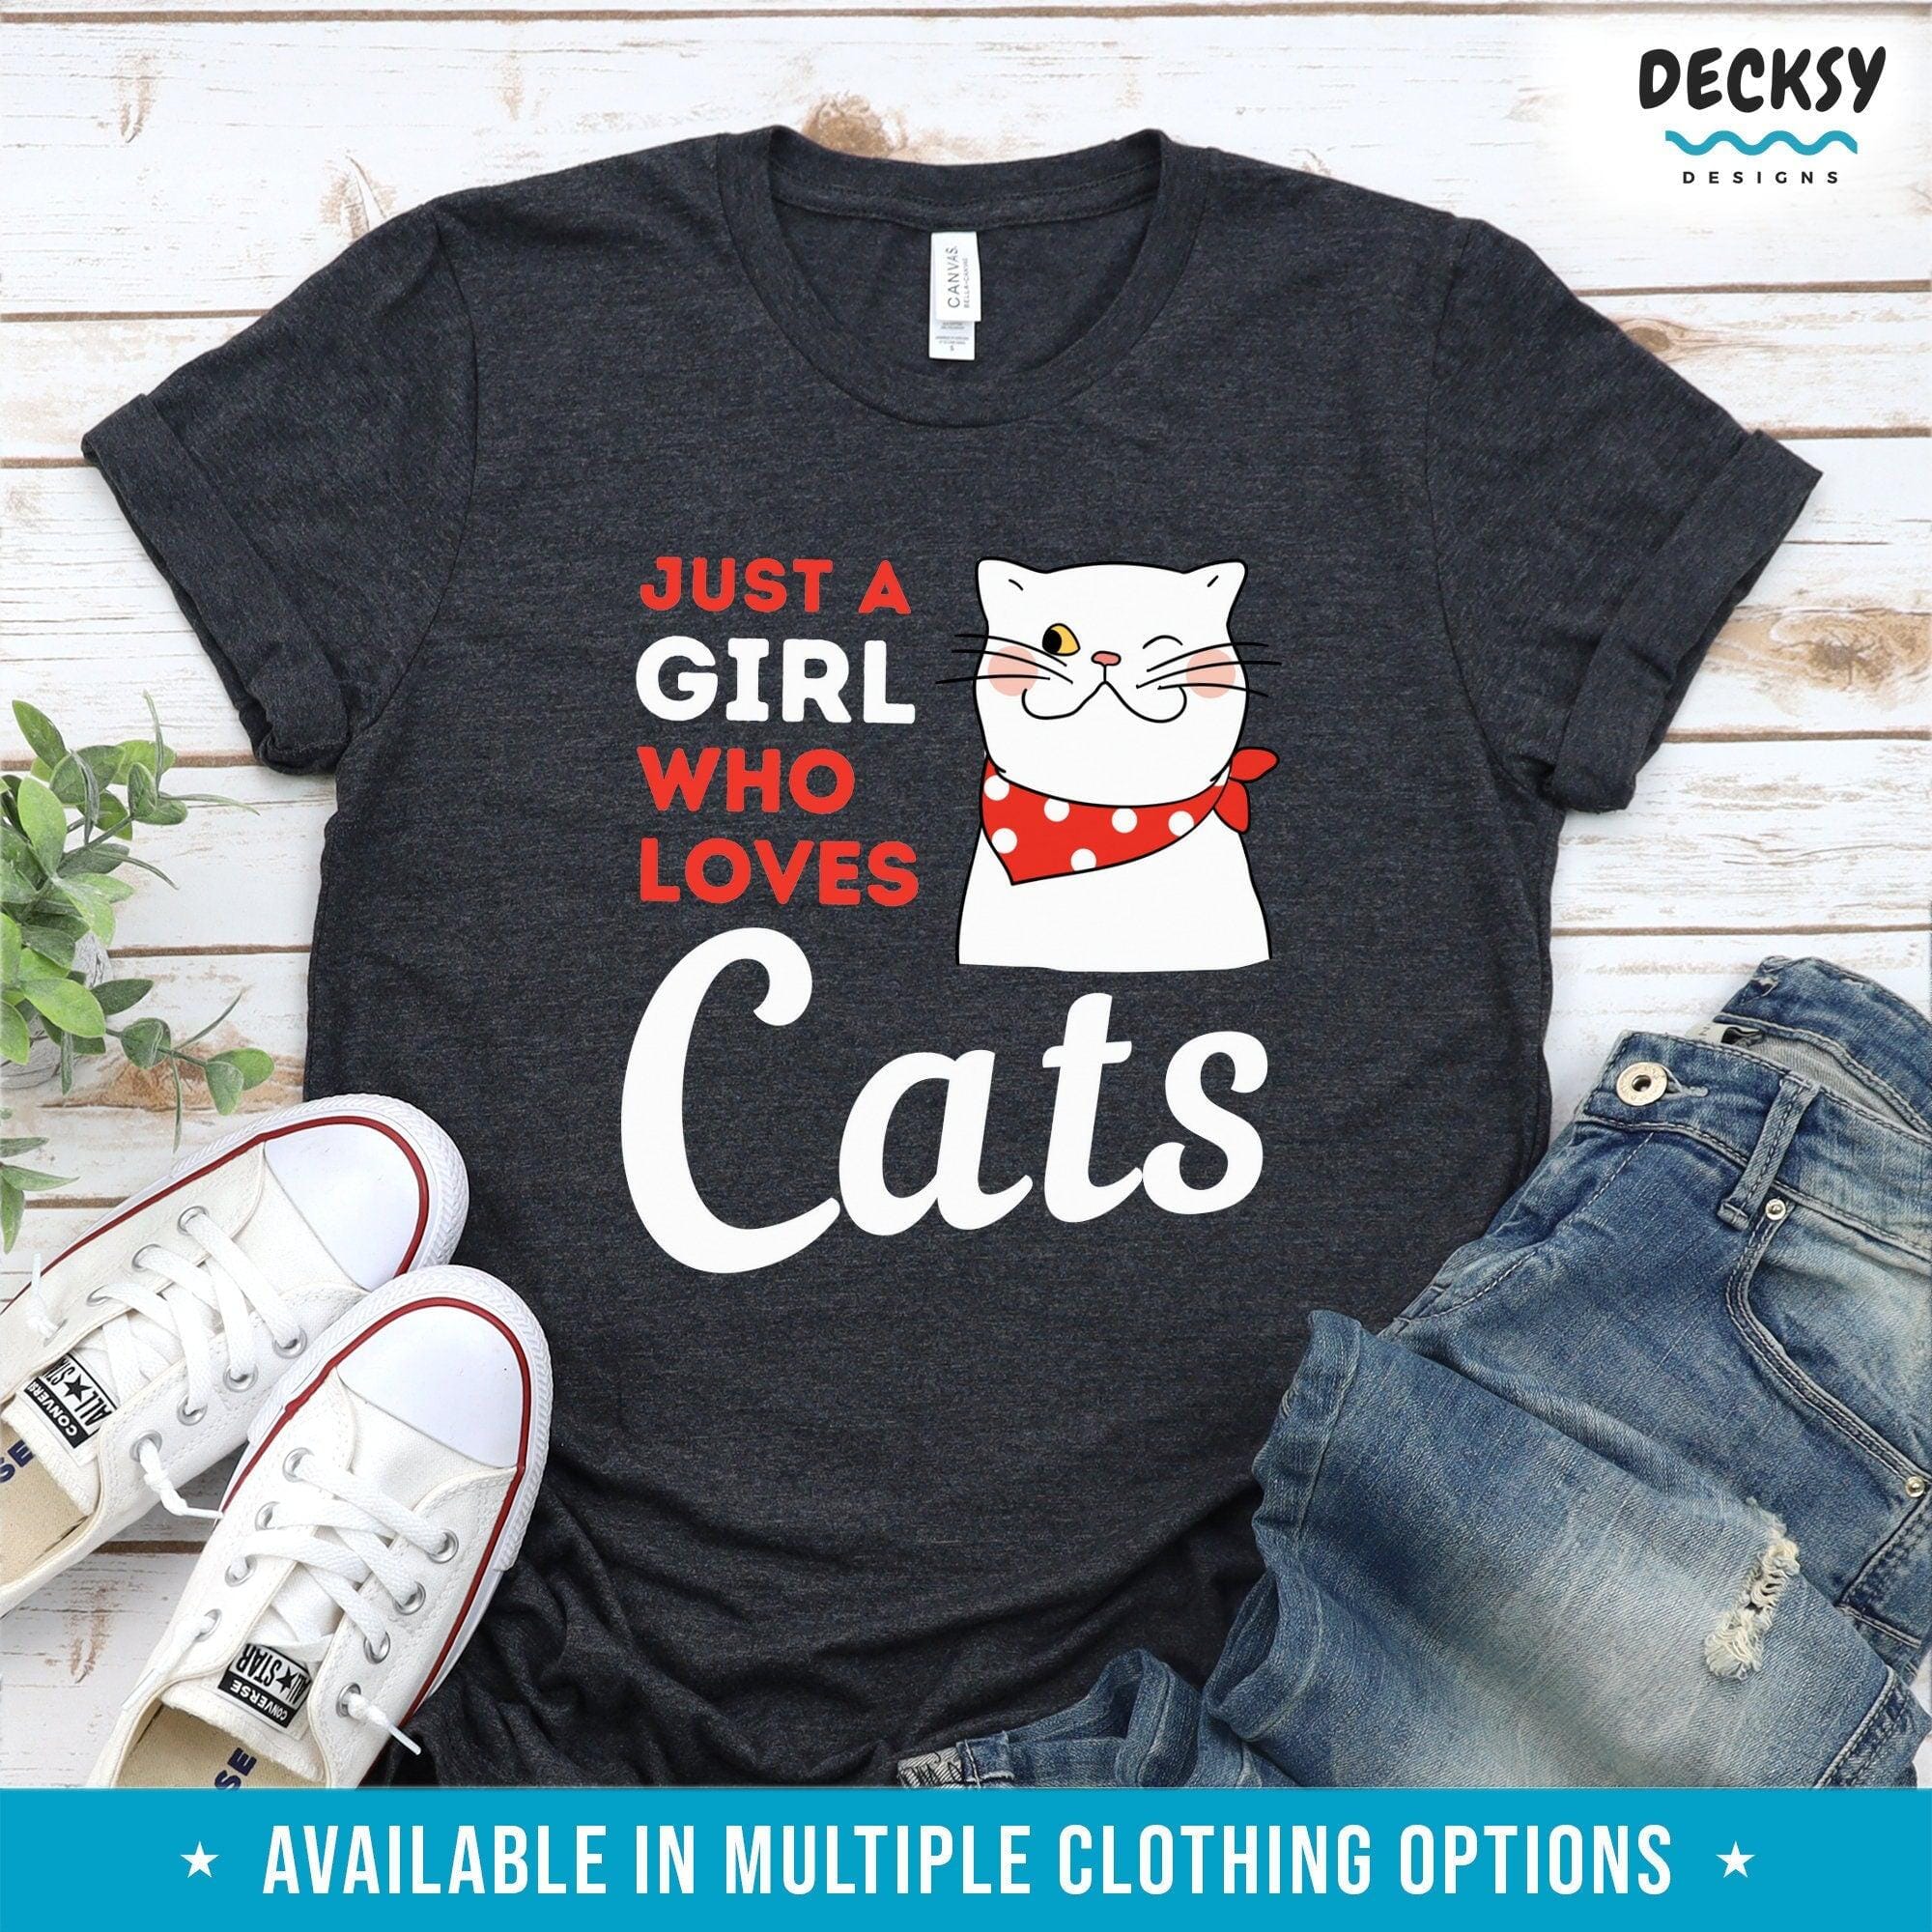 Cute Cat Shirt, Gift For Cat Lover-Clothing:Gender-Neutral Adult Clothing:Tops & Tees:T-shirts:Graphic Tees-DecksyDesigns